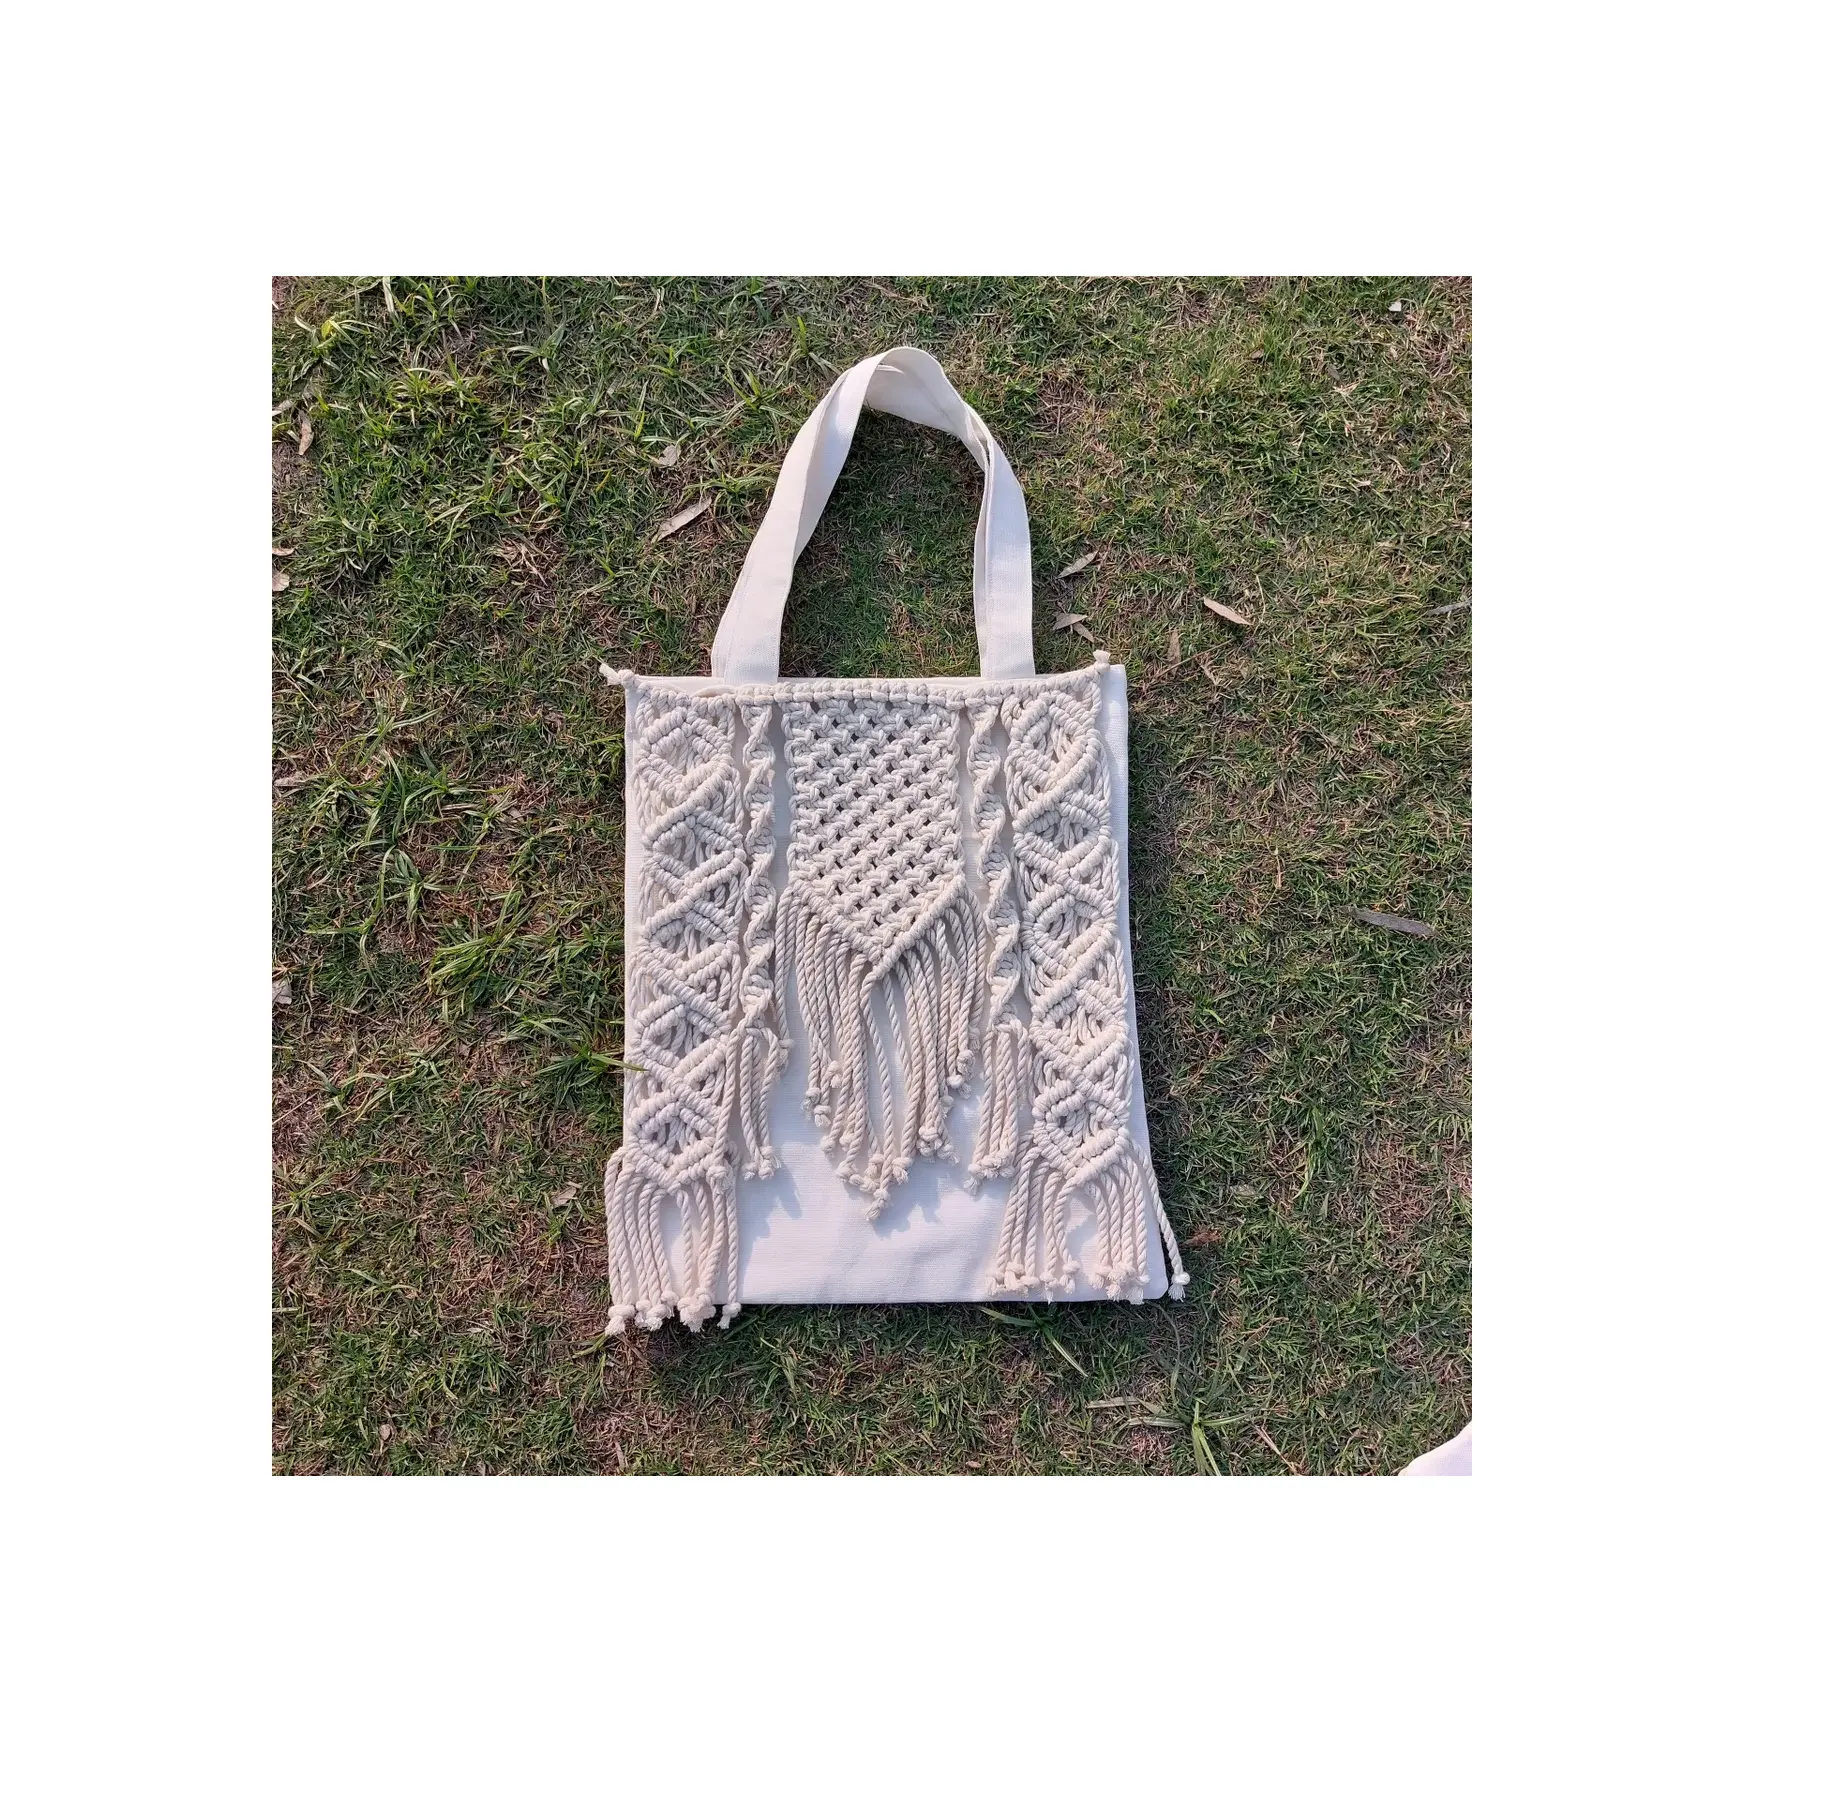 Fresh Arrivals Macrame Hand Bags Beautifully Design For Women Designer Shoulders Hand Purse Wholesale Suppliers At Cheap Price